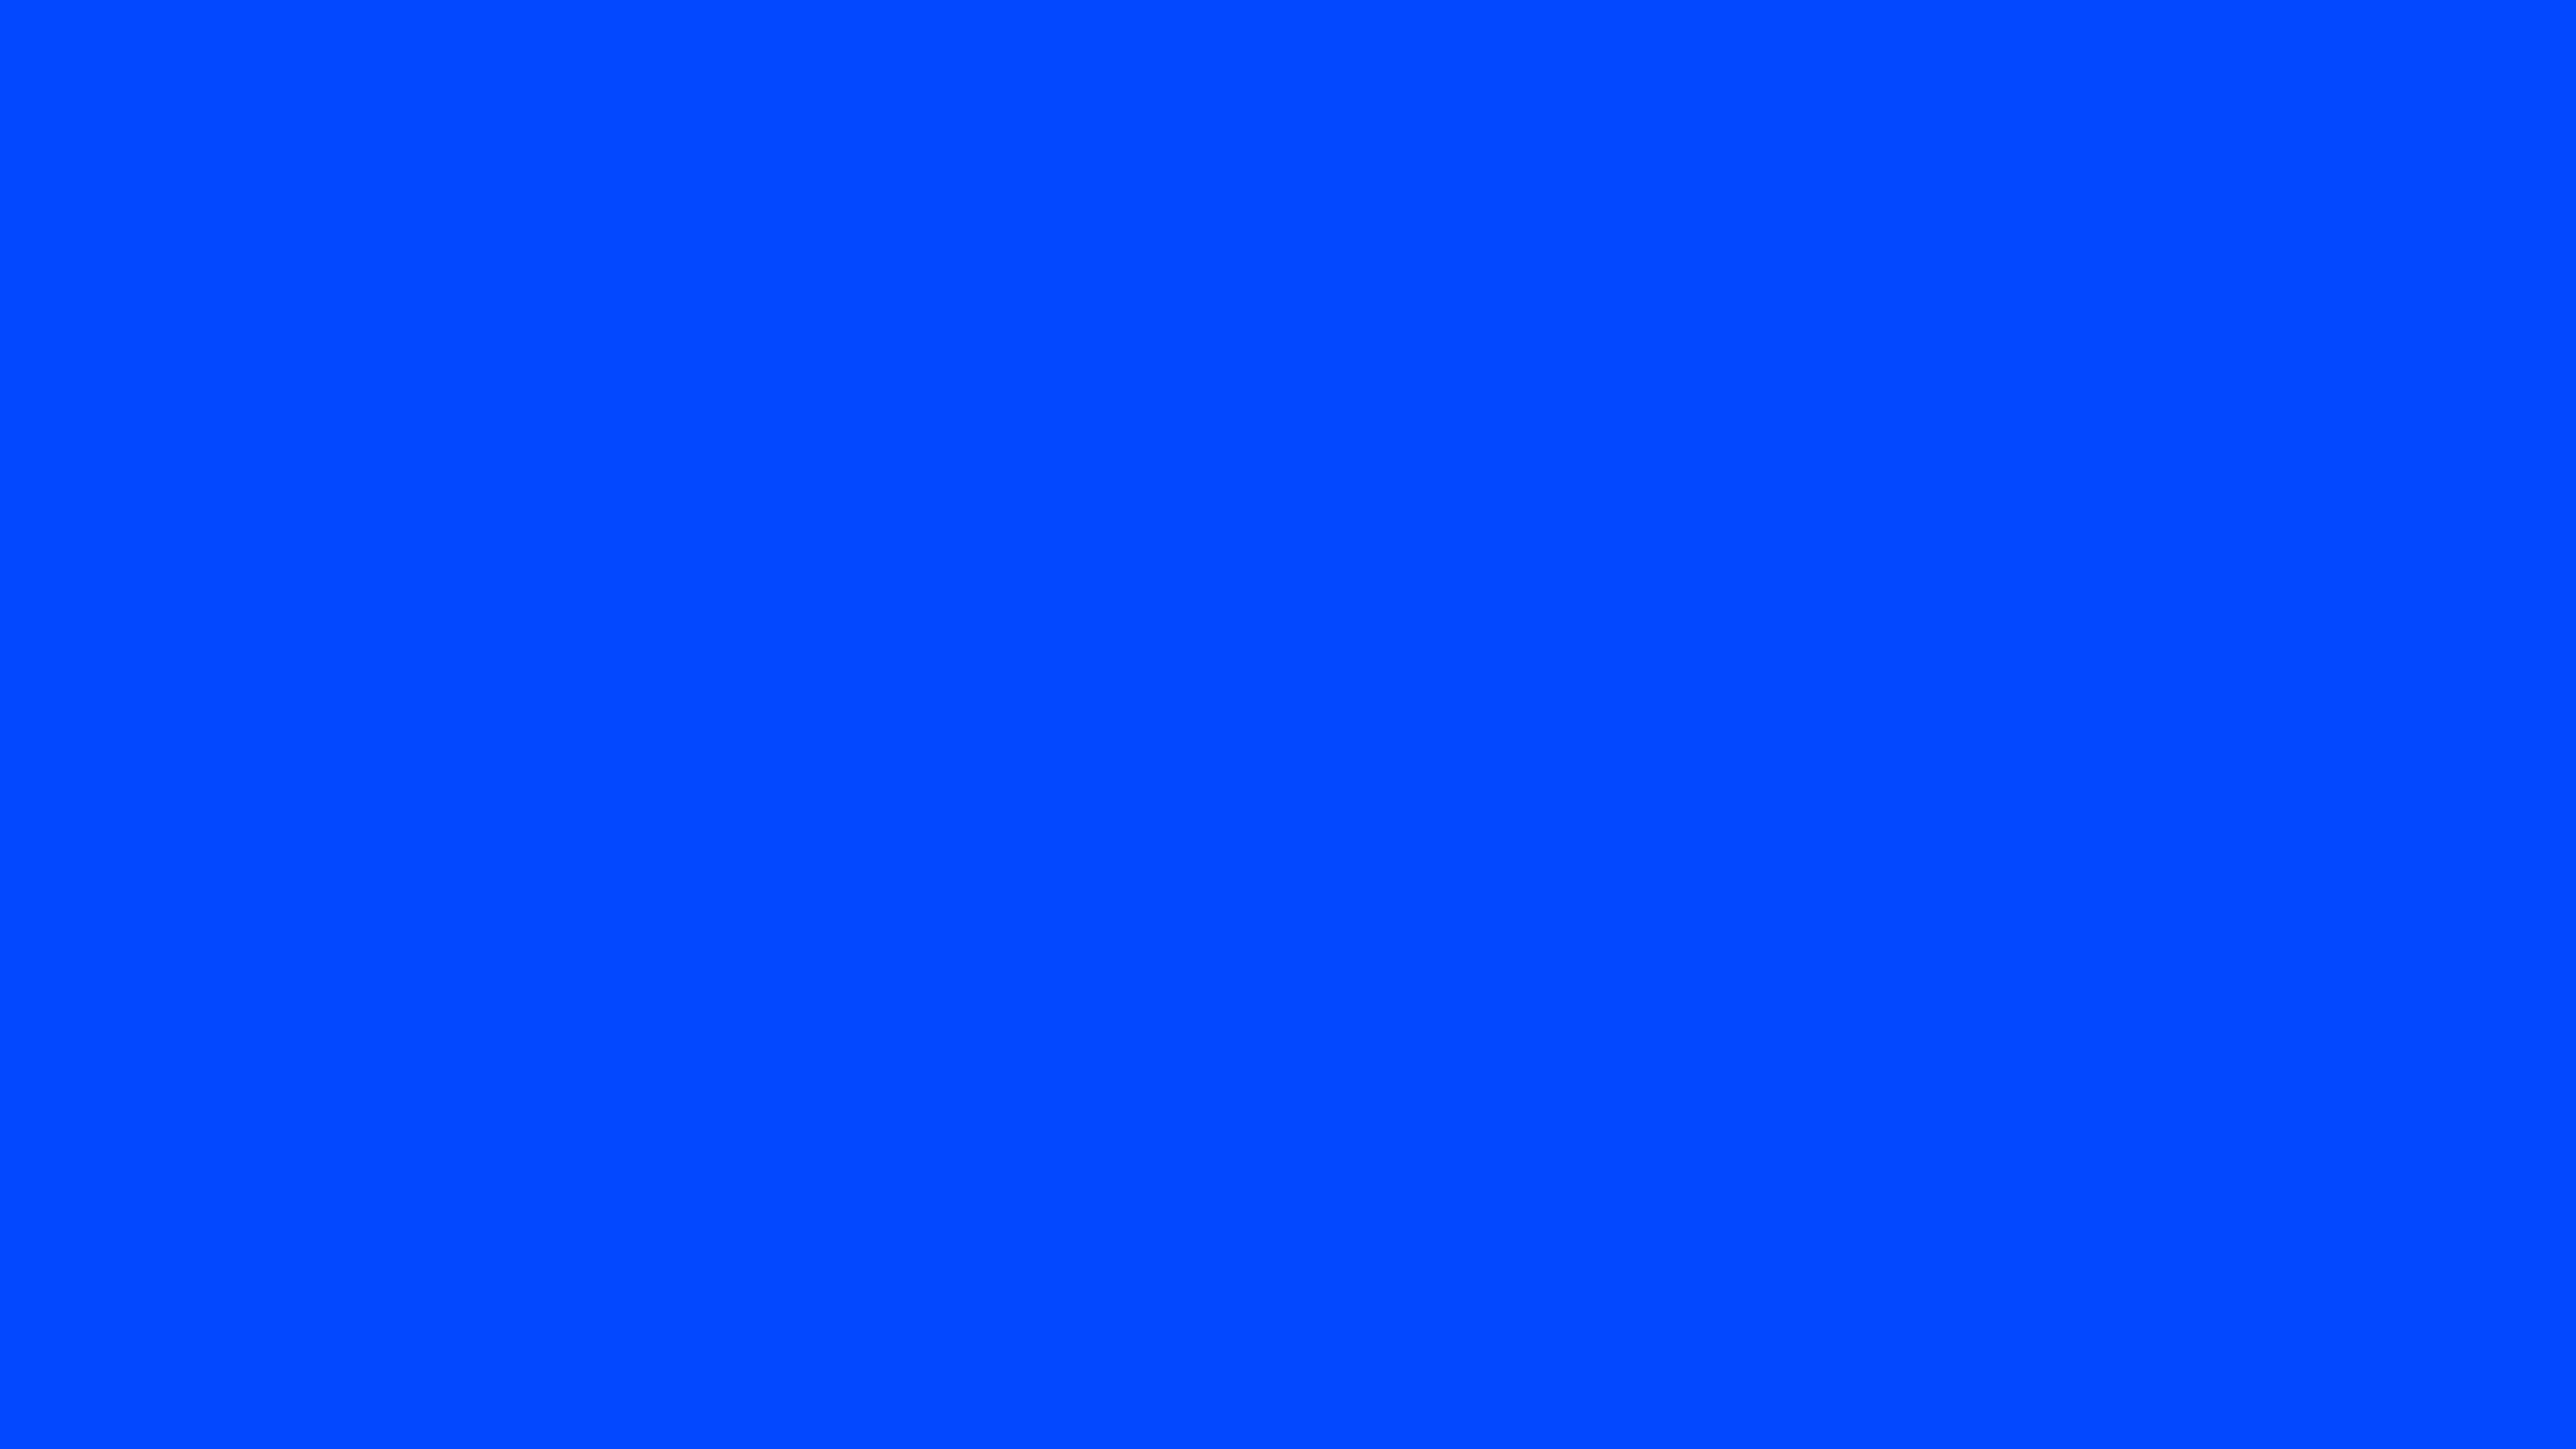 5120x2880 Blue RYB Solid Color Background